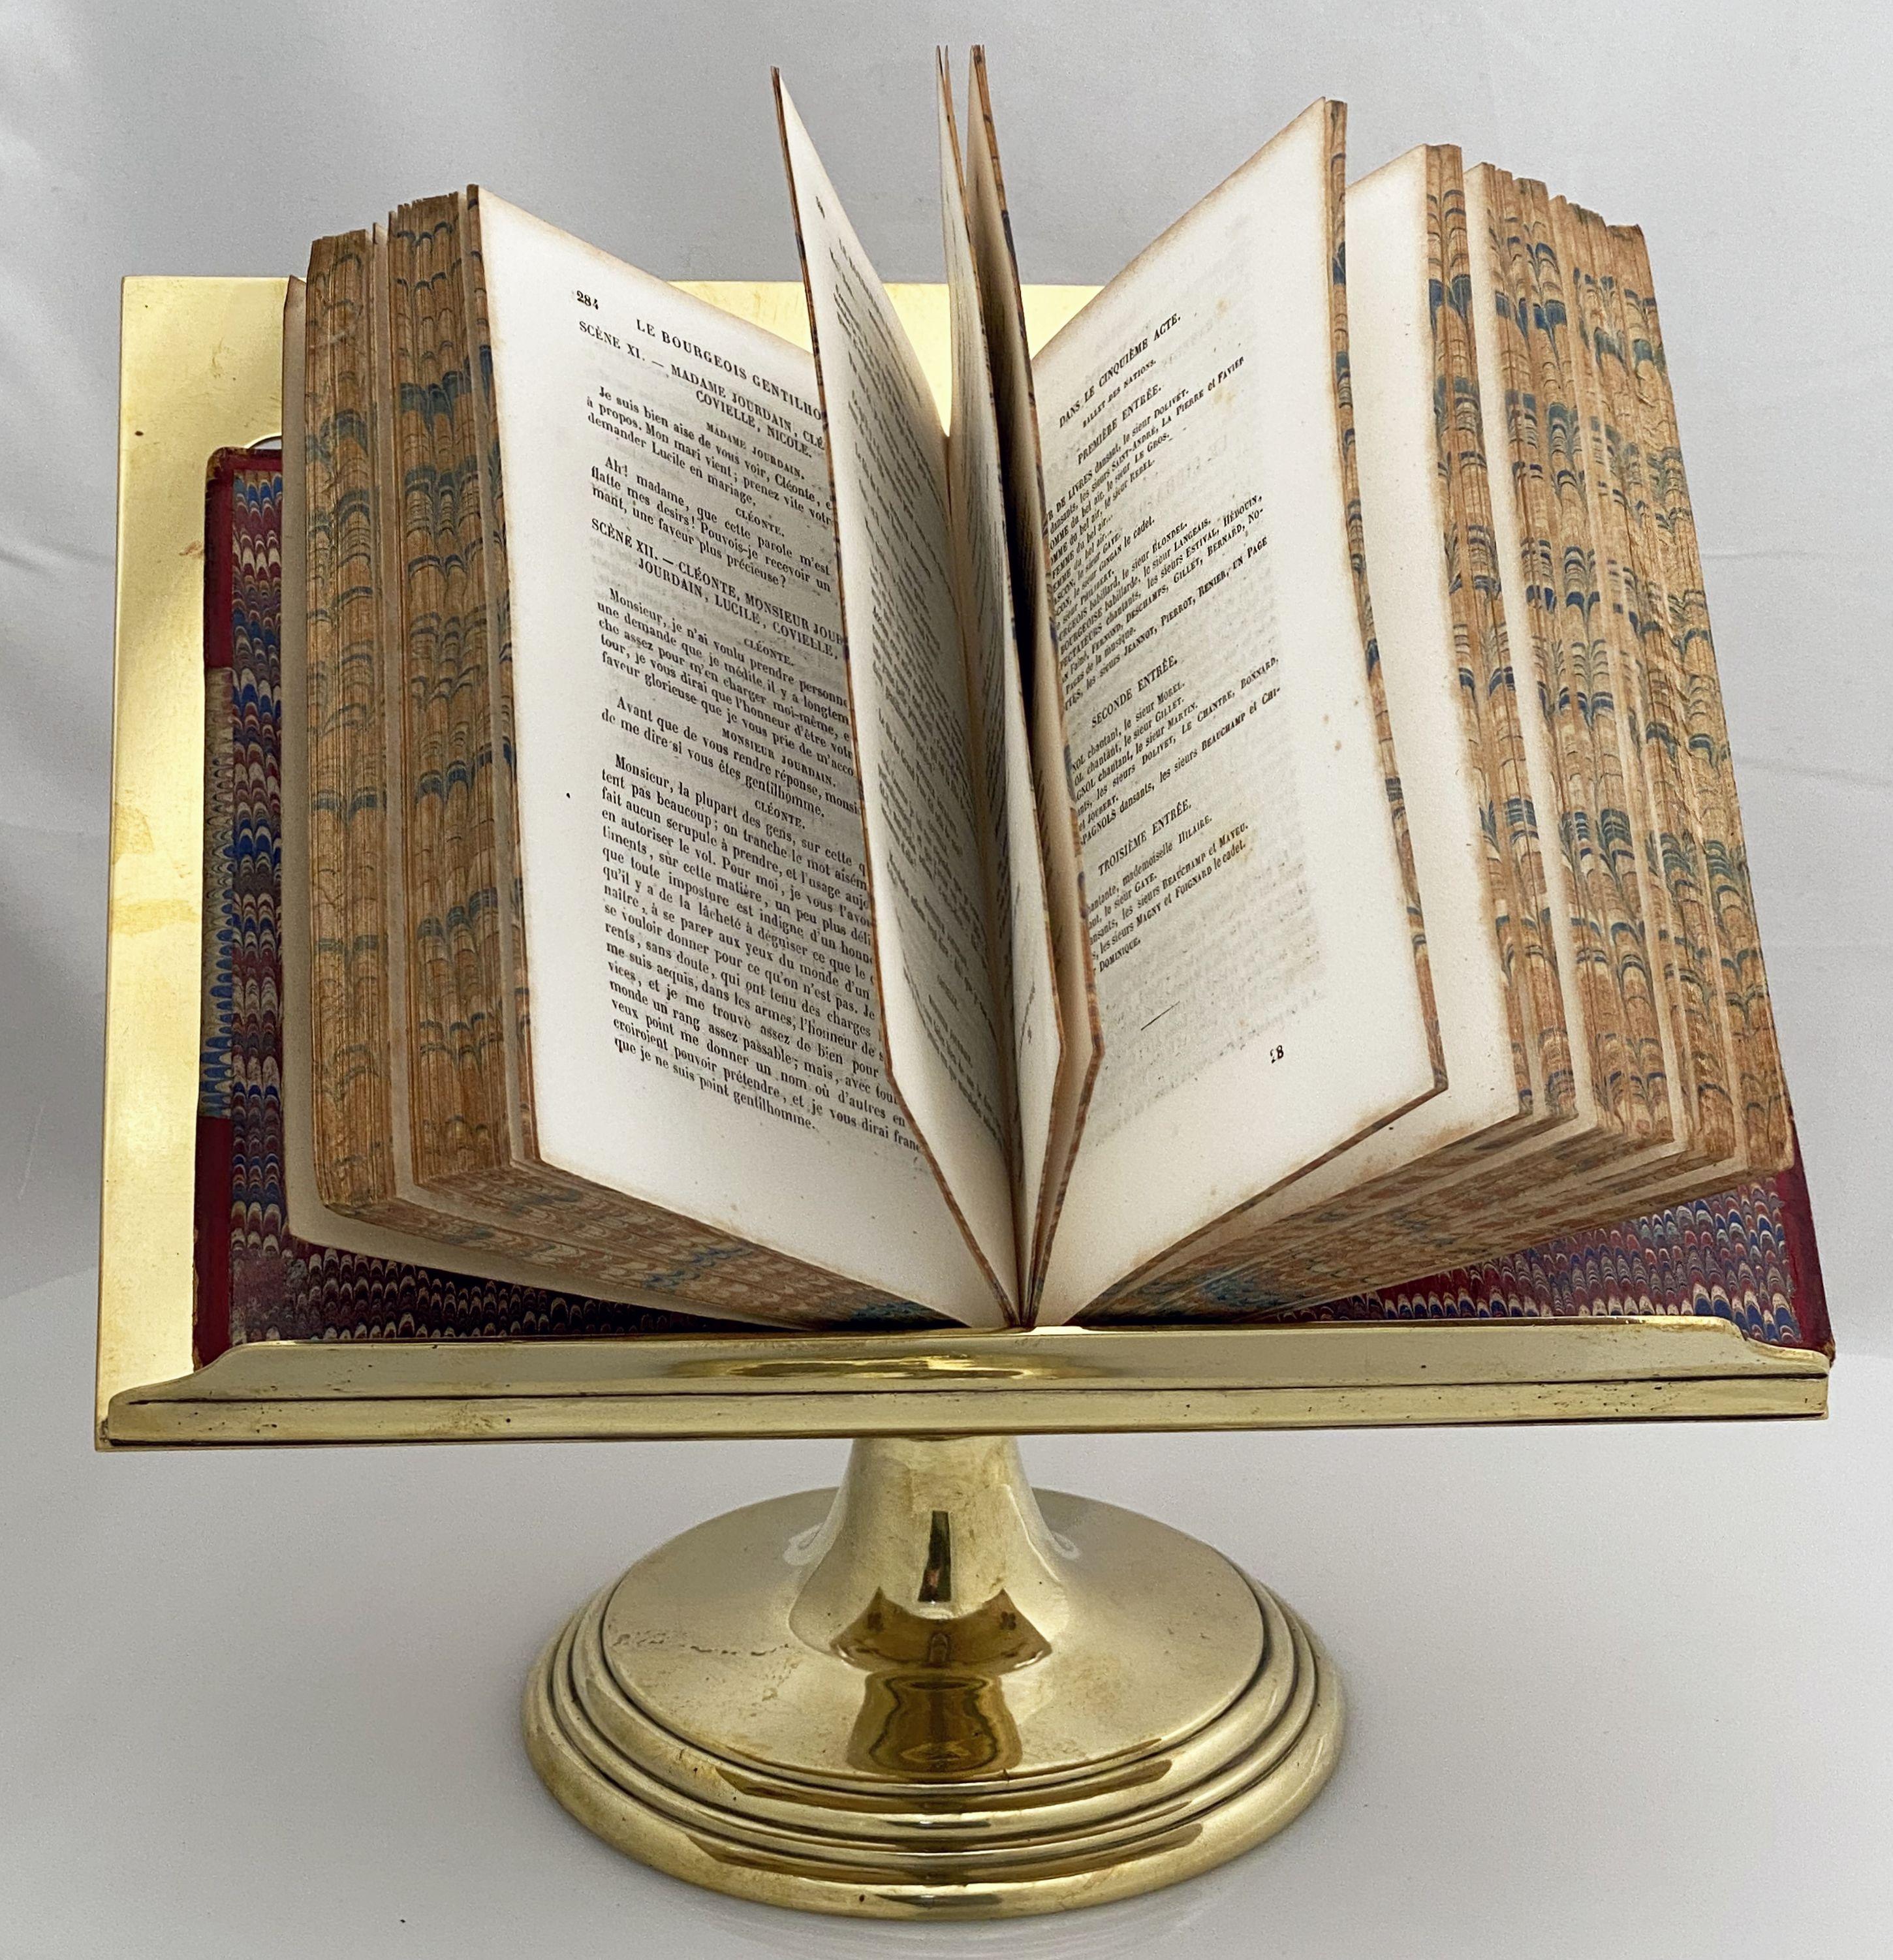 A fine English table top lectern, missal or book stand of brass, featuring a reading top with pierced quatrefoils at each corner. The revolving rectangular top attached to a weighted circular base.

Suitable for displaying various sized books - an